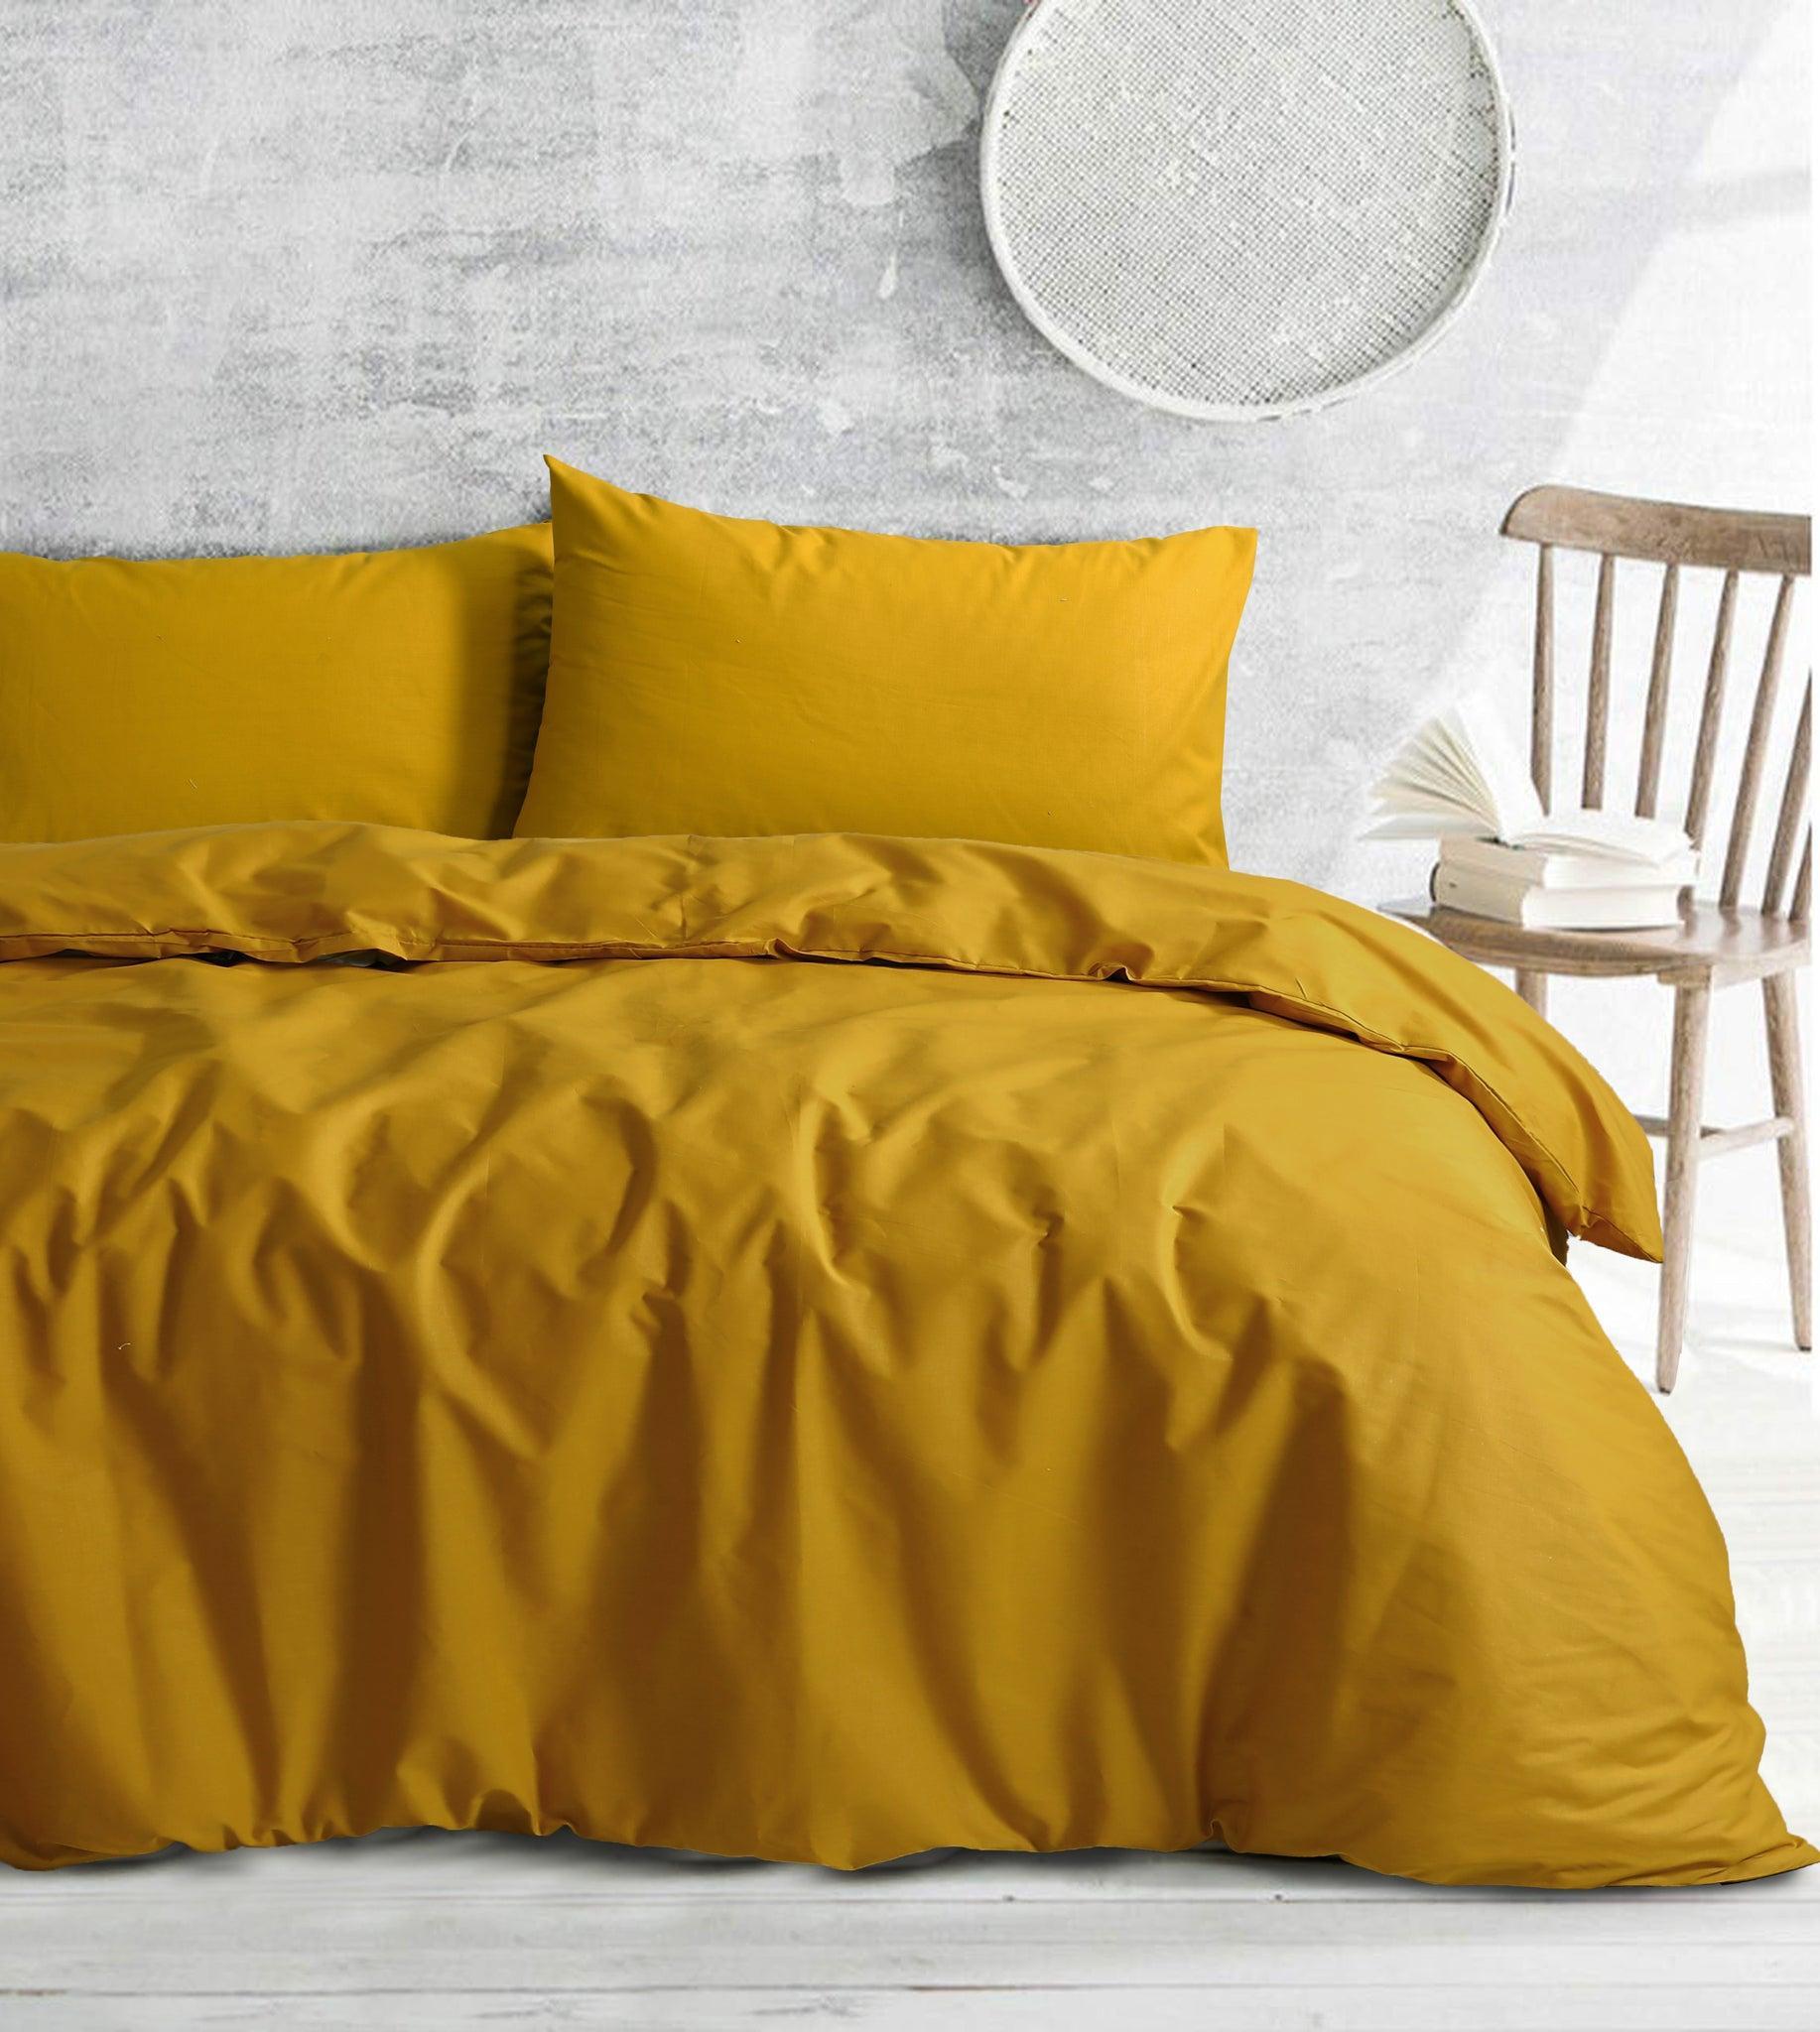 Amsons Royale Cotton Double Quilt Duvet Doona Cover Set with Europeon pillowcases - Mustard